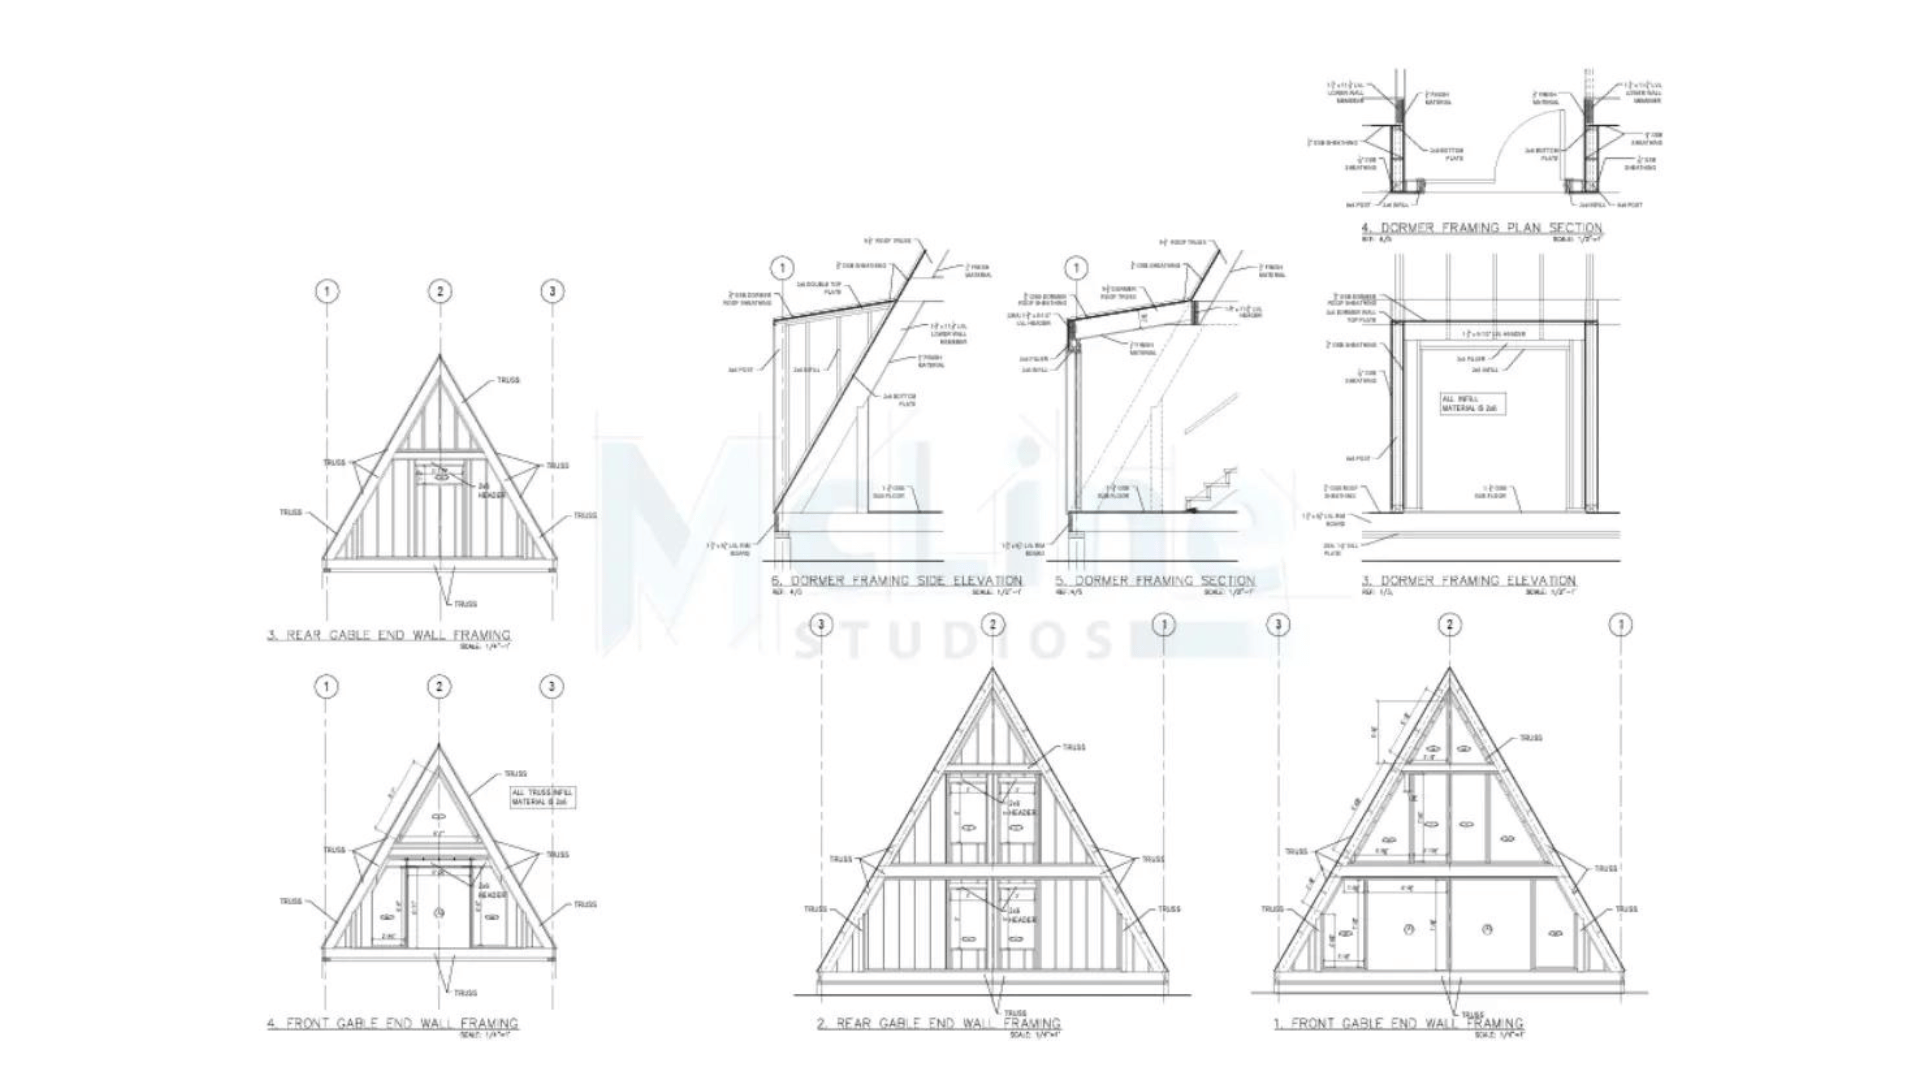 Structure drawings